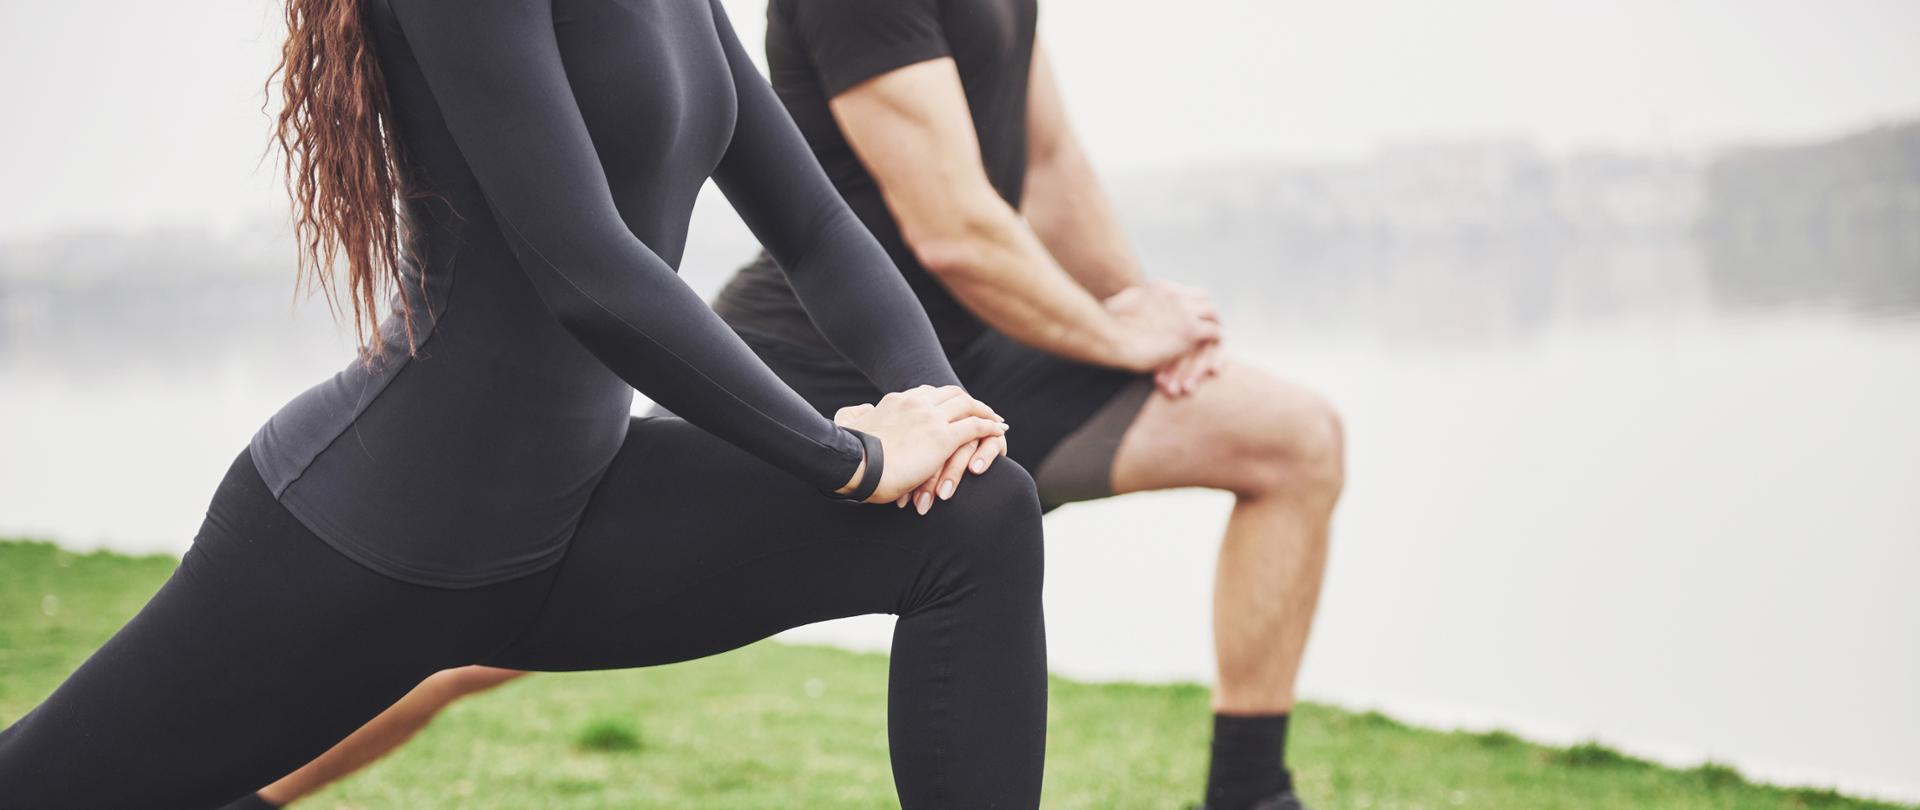 Fitness couple stretching outdoors in park near the water. Young bearded man and woman exercising together in morning.